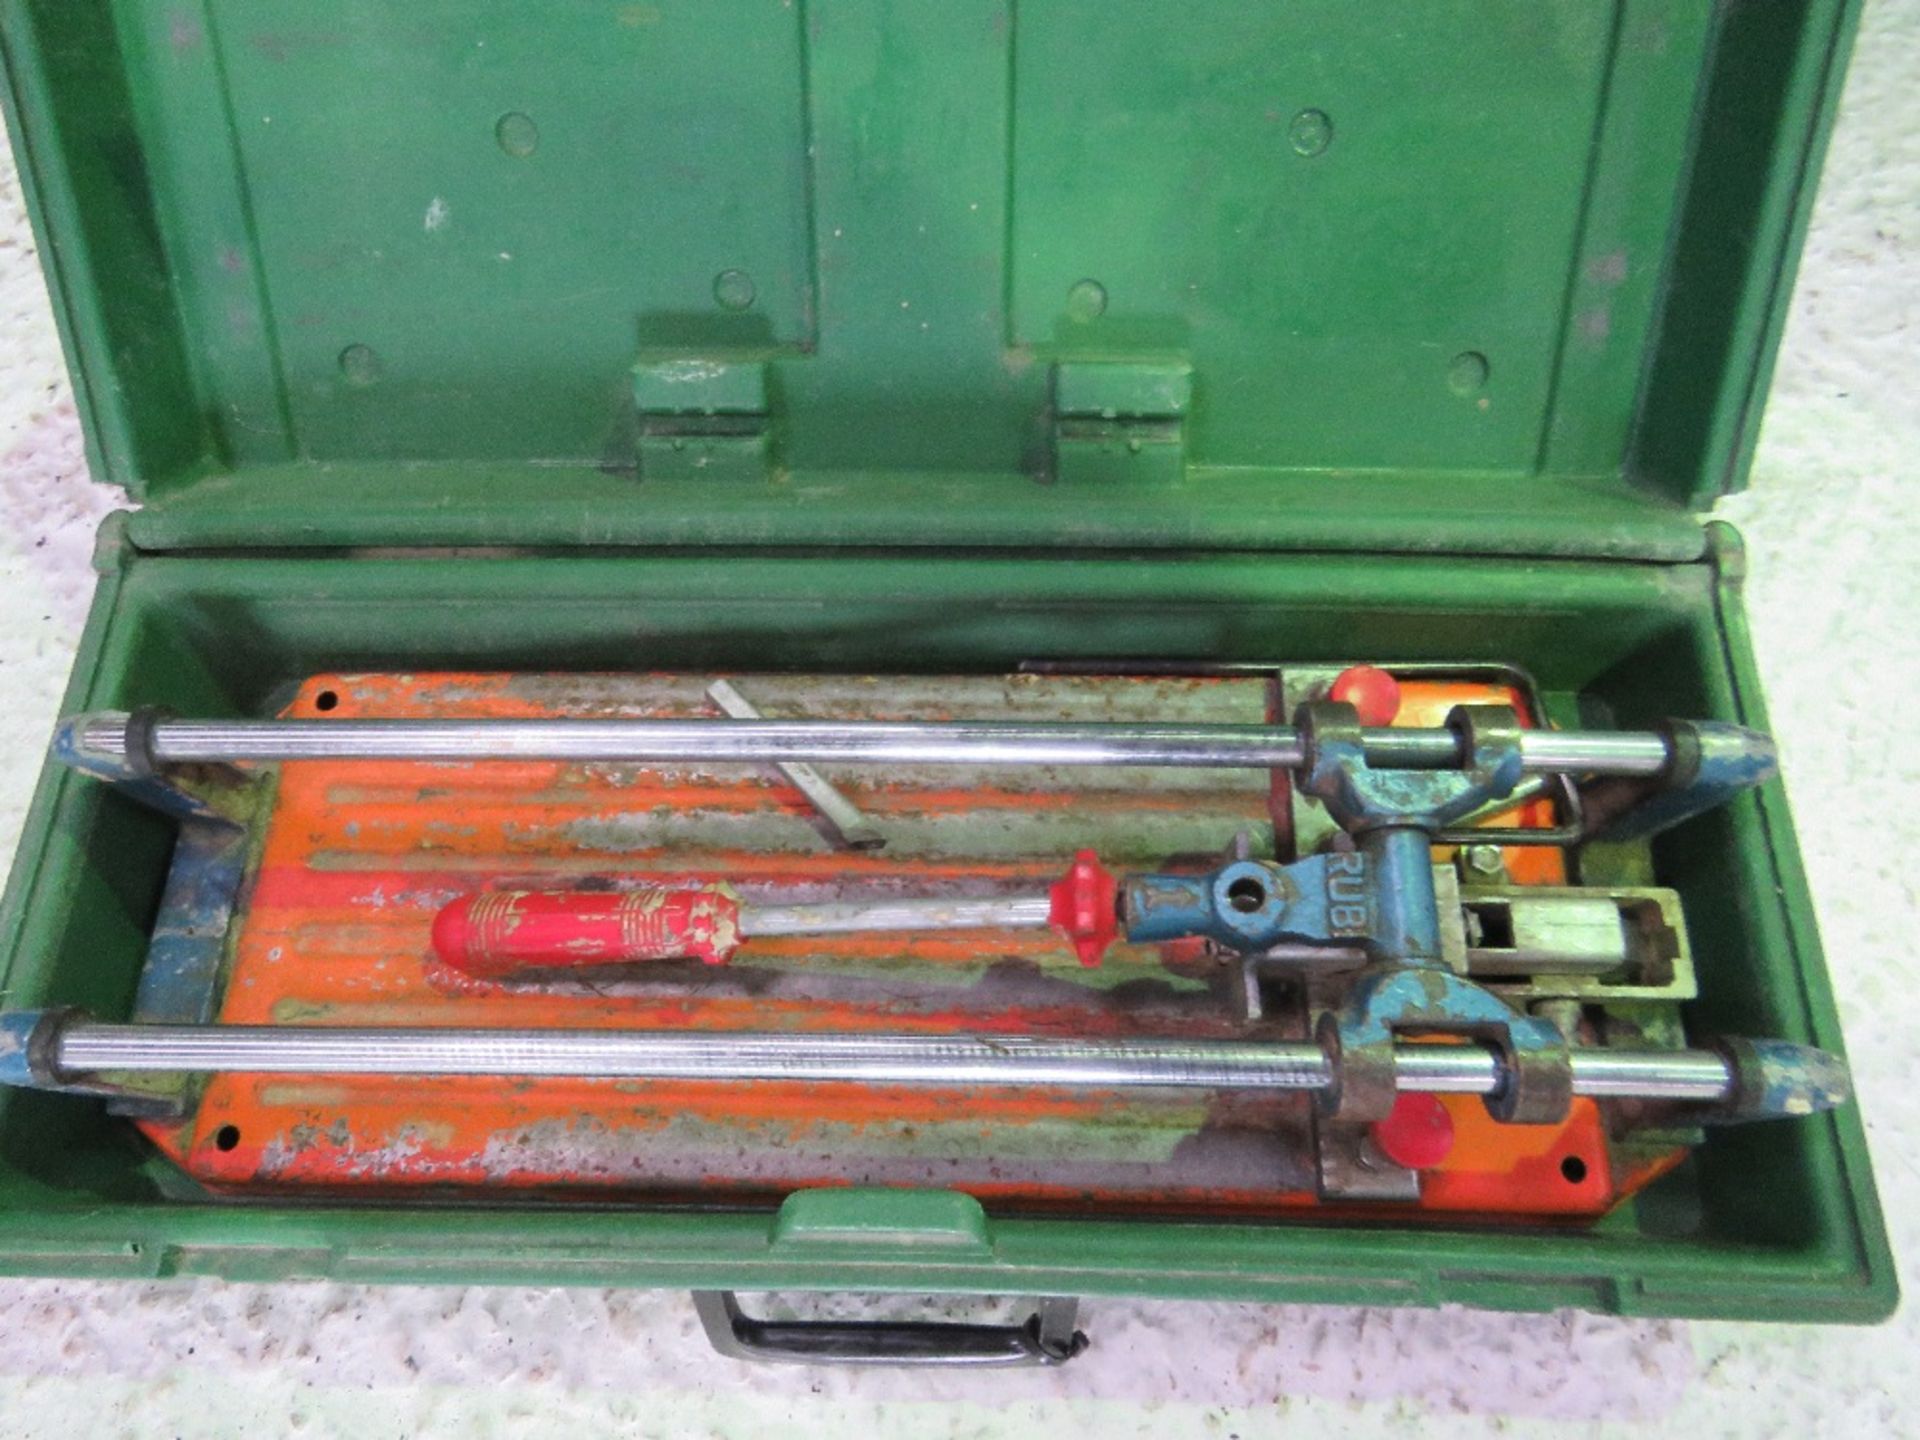 TILE SAW 240VOLT POWERED PLUS A MANUAL TILE CUTTER.....THIS LOT IS SOLD UNDER THE AUCTIONEERS MARGI - Image 4 of 5